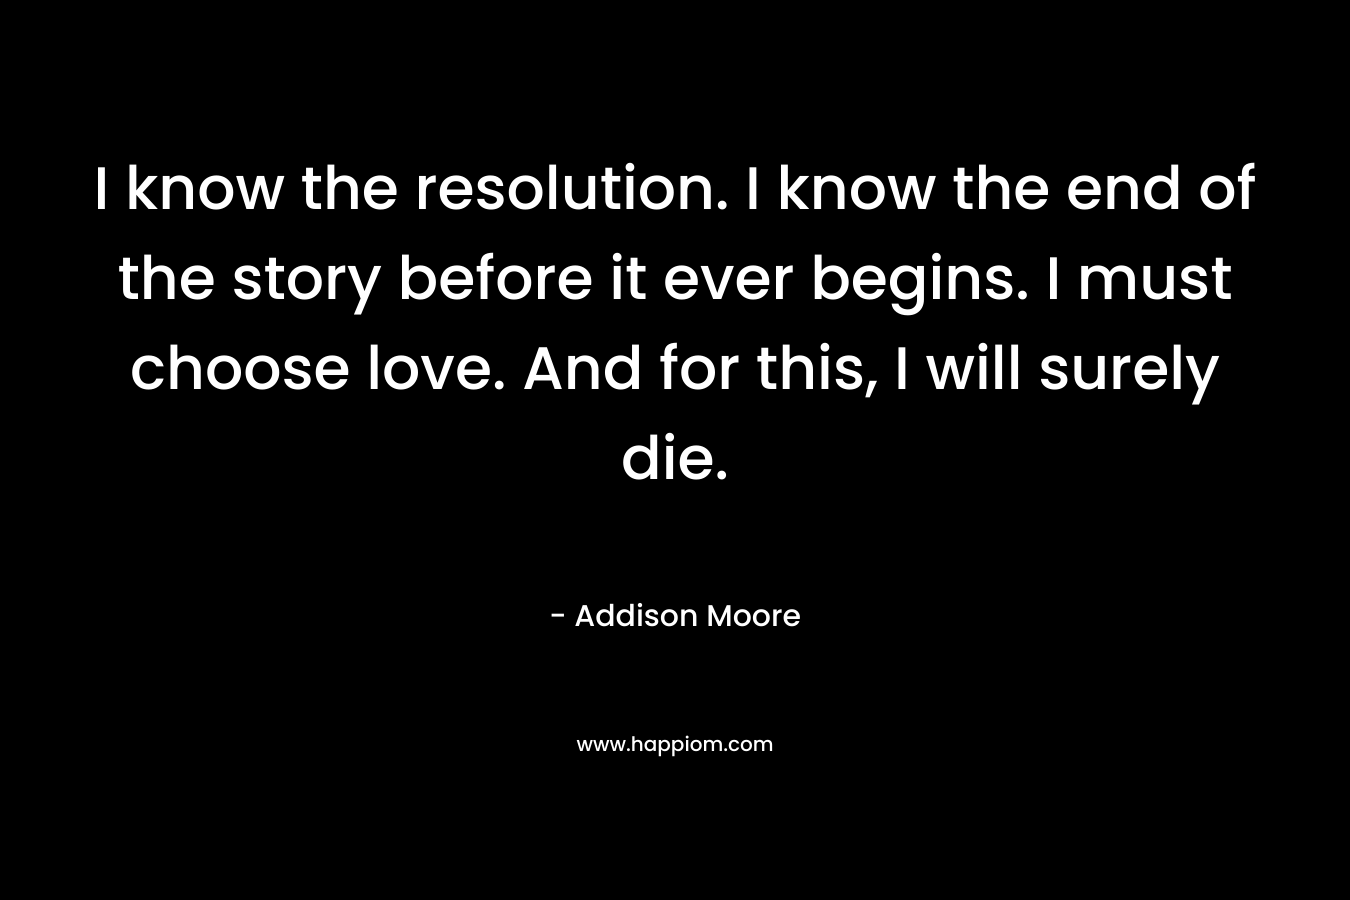 I know the resolution. I know the end of the story before it ever begins. I must choose love. And for this, I will surely die. – Addison Moore